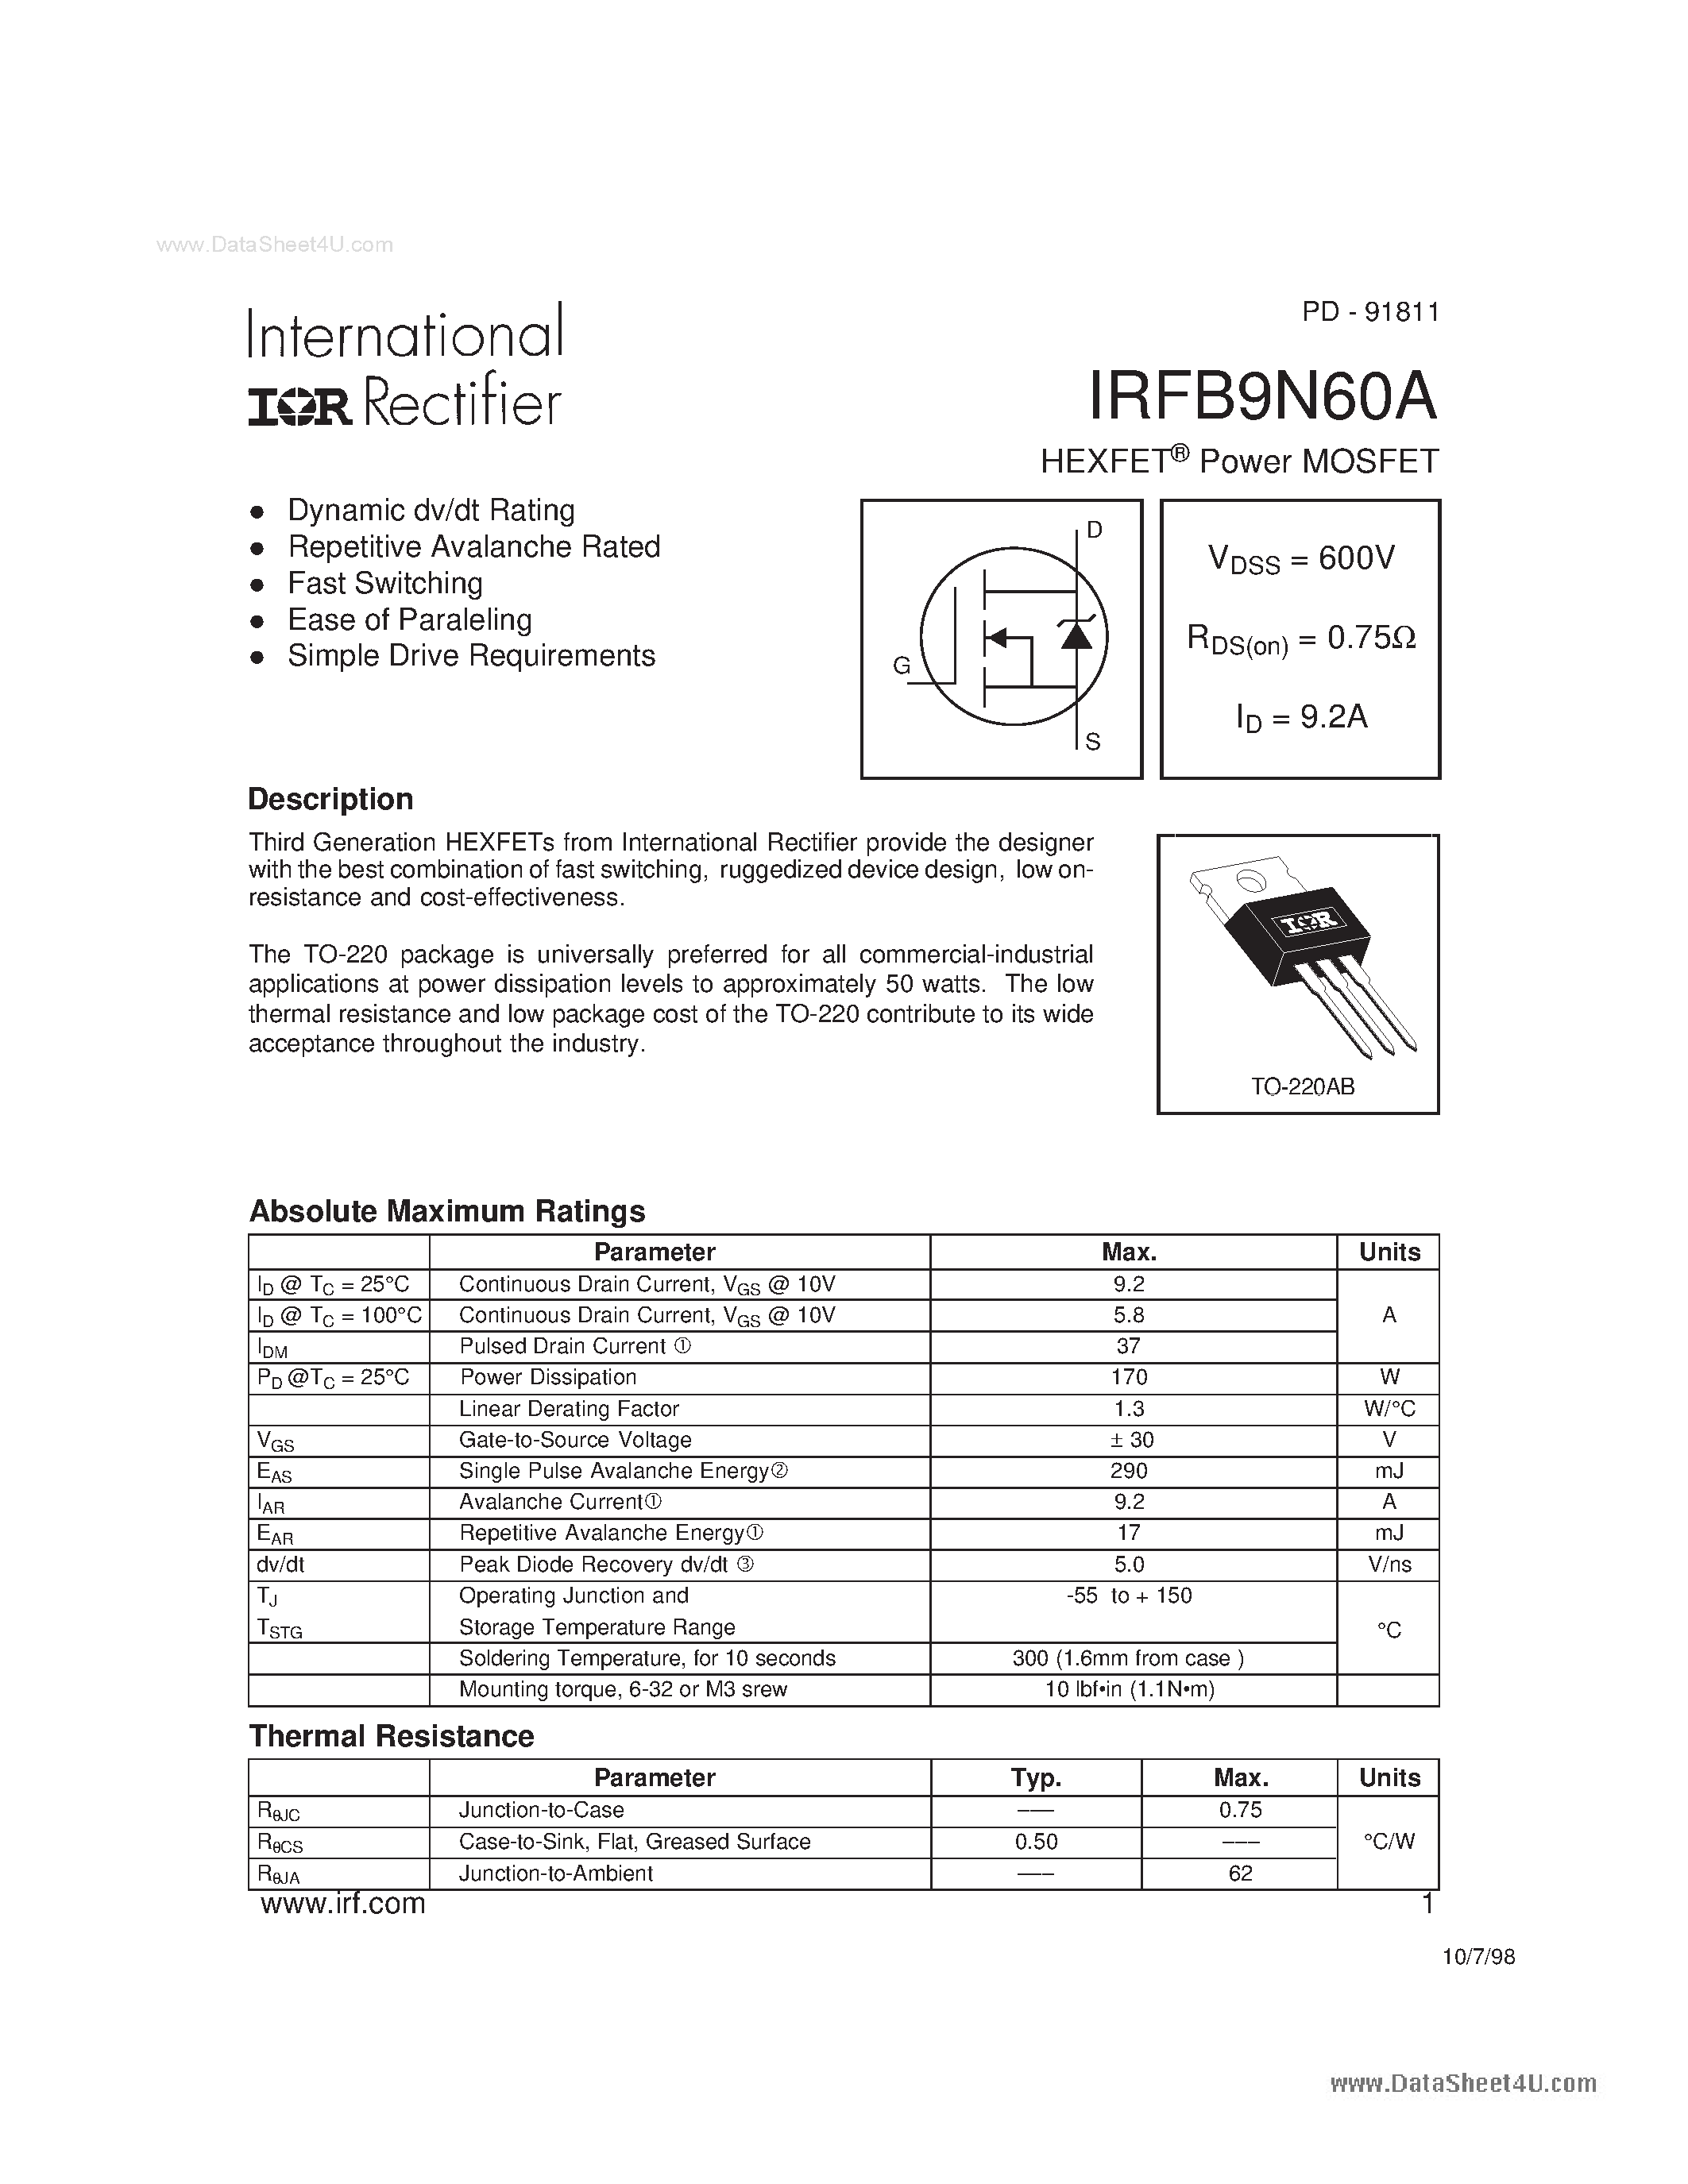 Datasheet FB-9N60A - Search -----> IRFB9N60A page 1